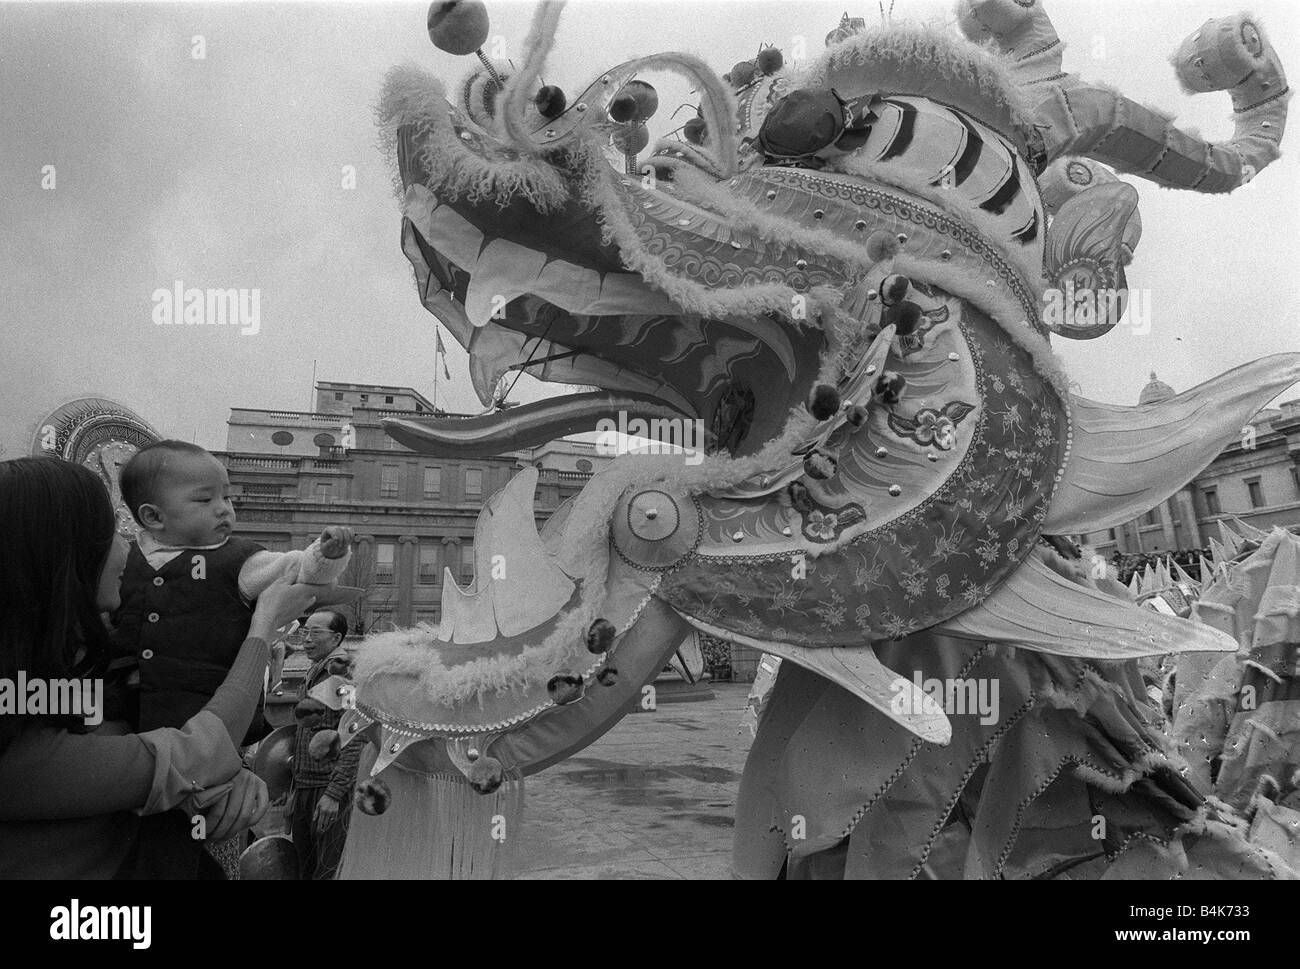 Chinese New Year Celebration Trafalgar Square London February 1977 140ft Chinese Dragon A Chinese Dragon dance the first ever seen in Britain was performed in Trafalgar Square With it s 80 attendants it danced in celebration of the Chinese New Year The Dragon was made especially in Hong Kong and given to the Chinese communityby the Hong Kong Government Stock Photo